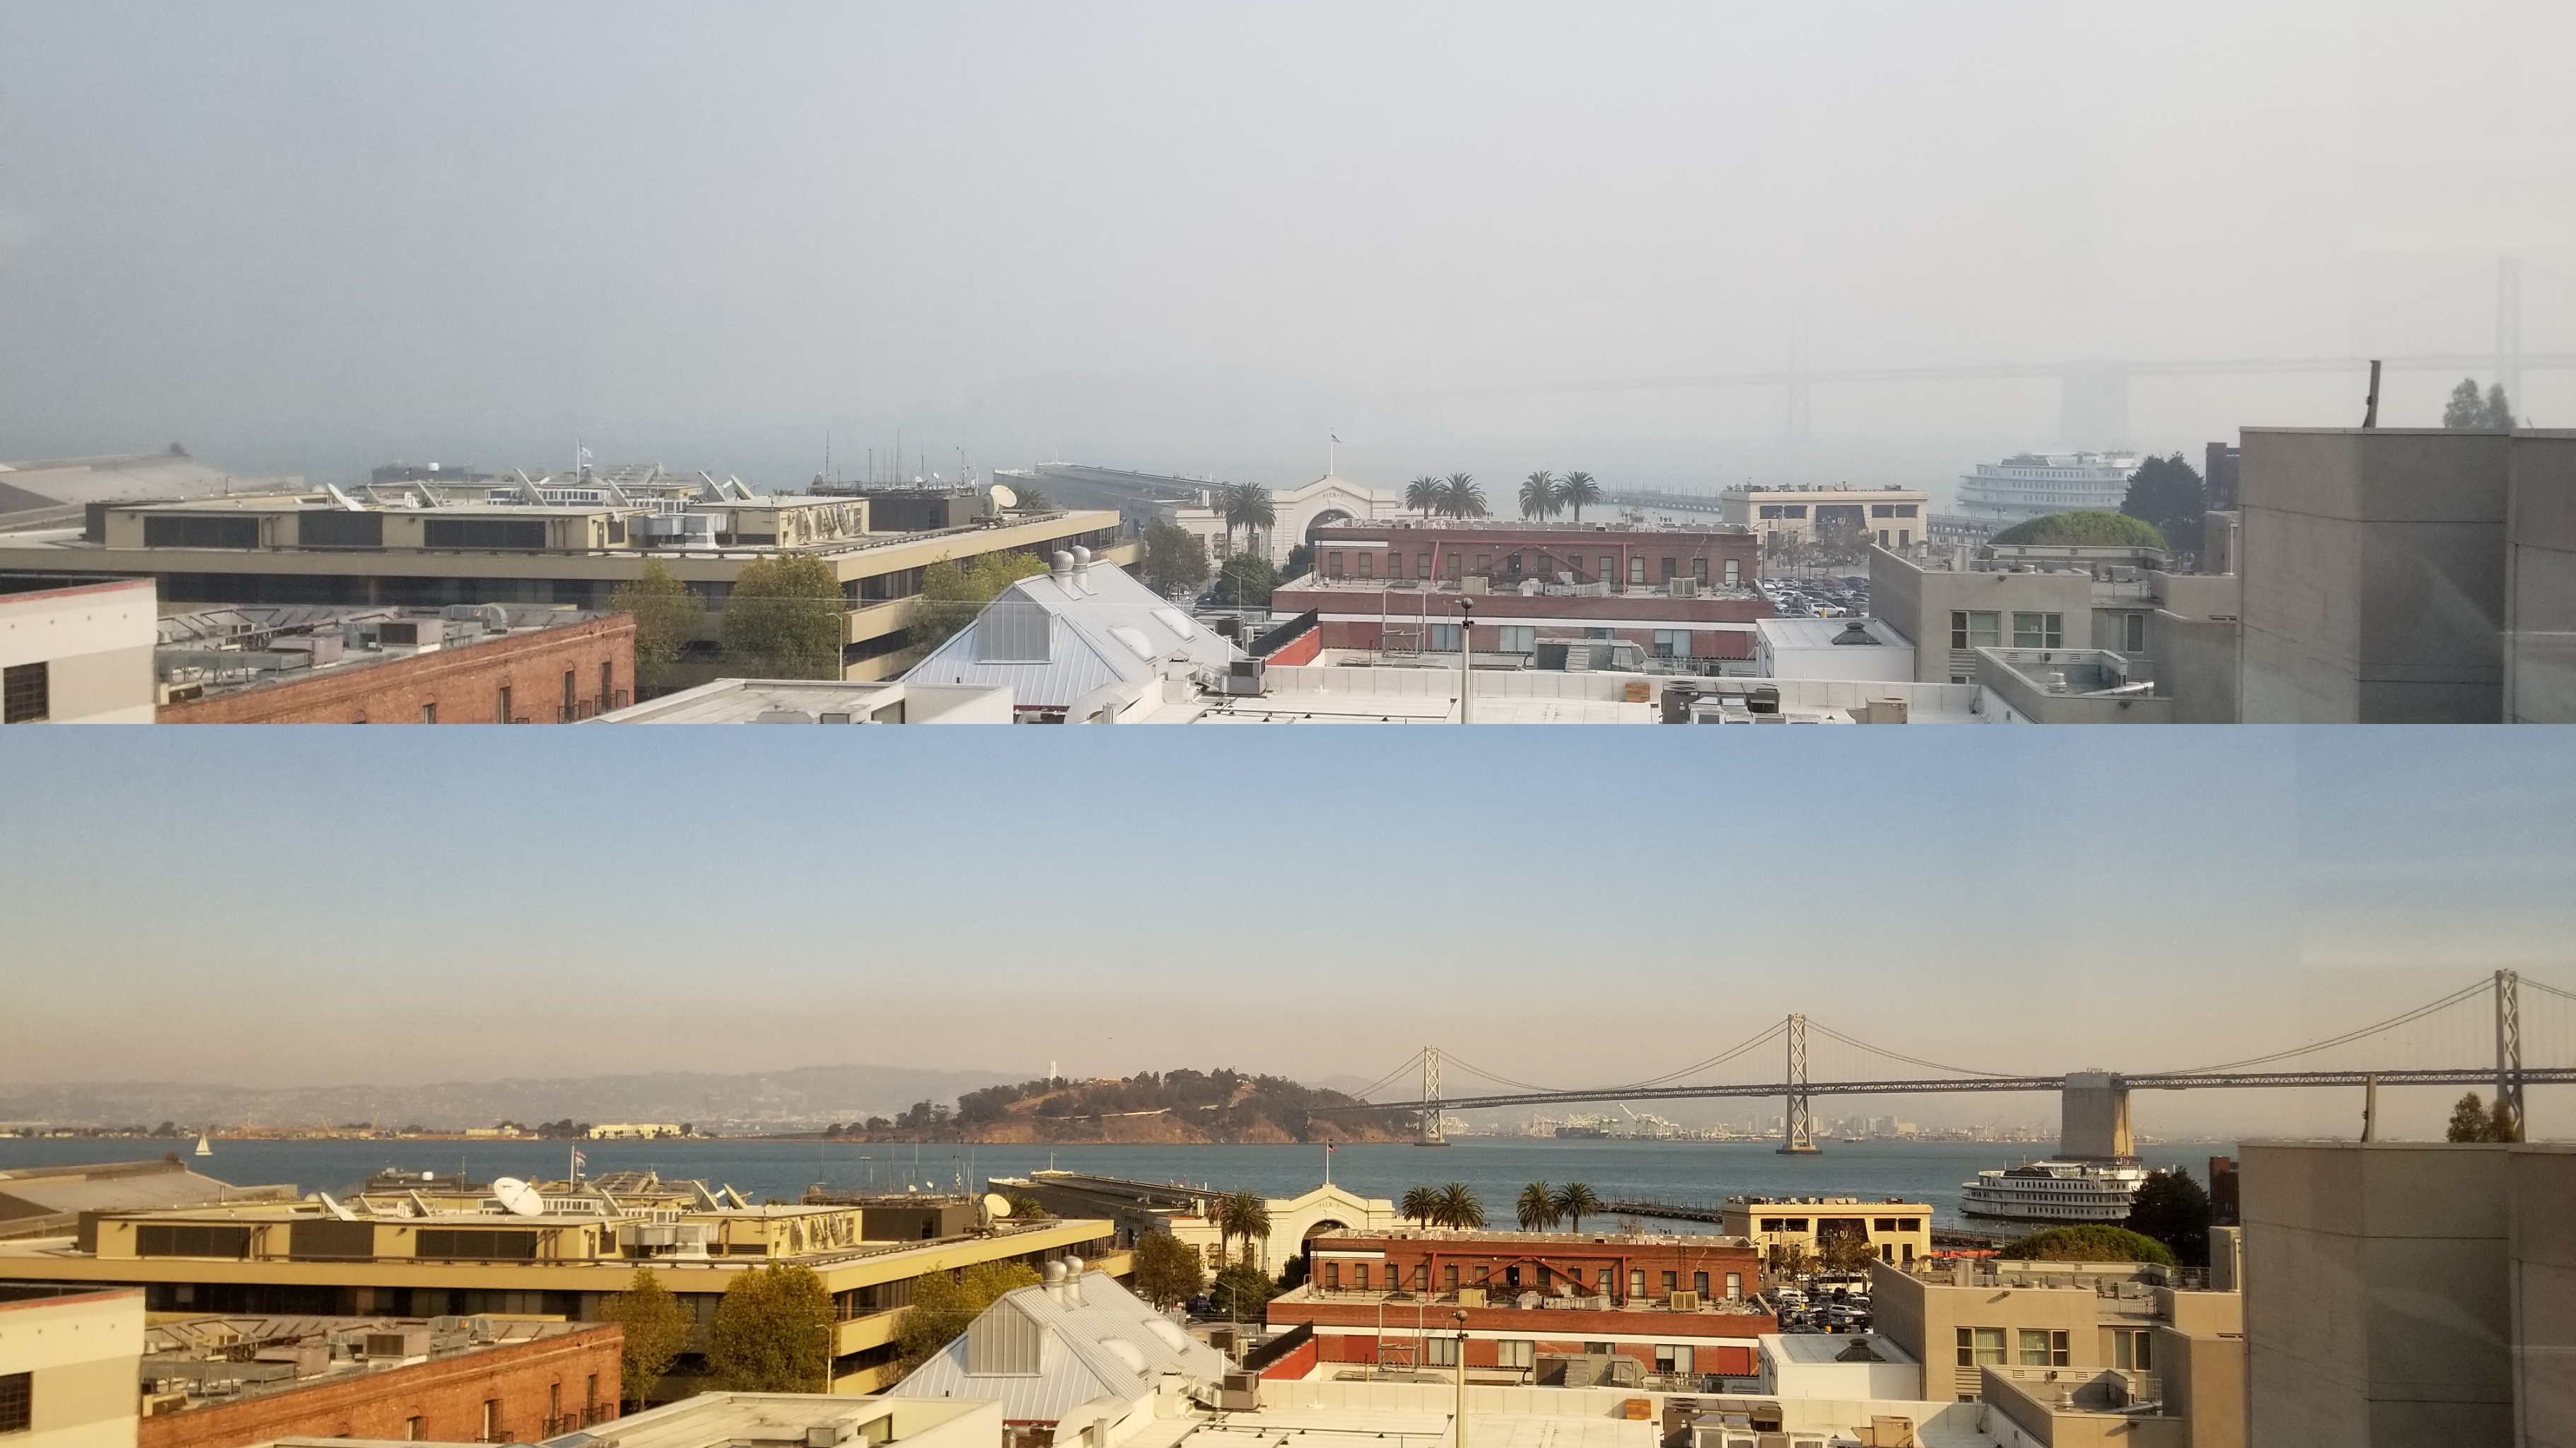 Views of the smoke from the Camp Fire from the KPIX studios in San Francisco. The above picture was taken on November 15, 2018, the picture on the bottom was taken on the day the fire broke out, November 8, 2018. (Tim Fang / CBS)